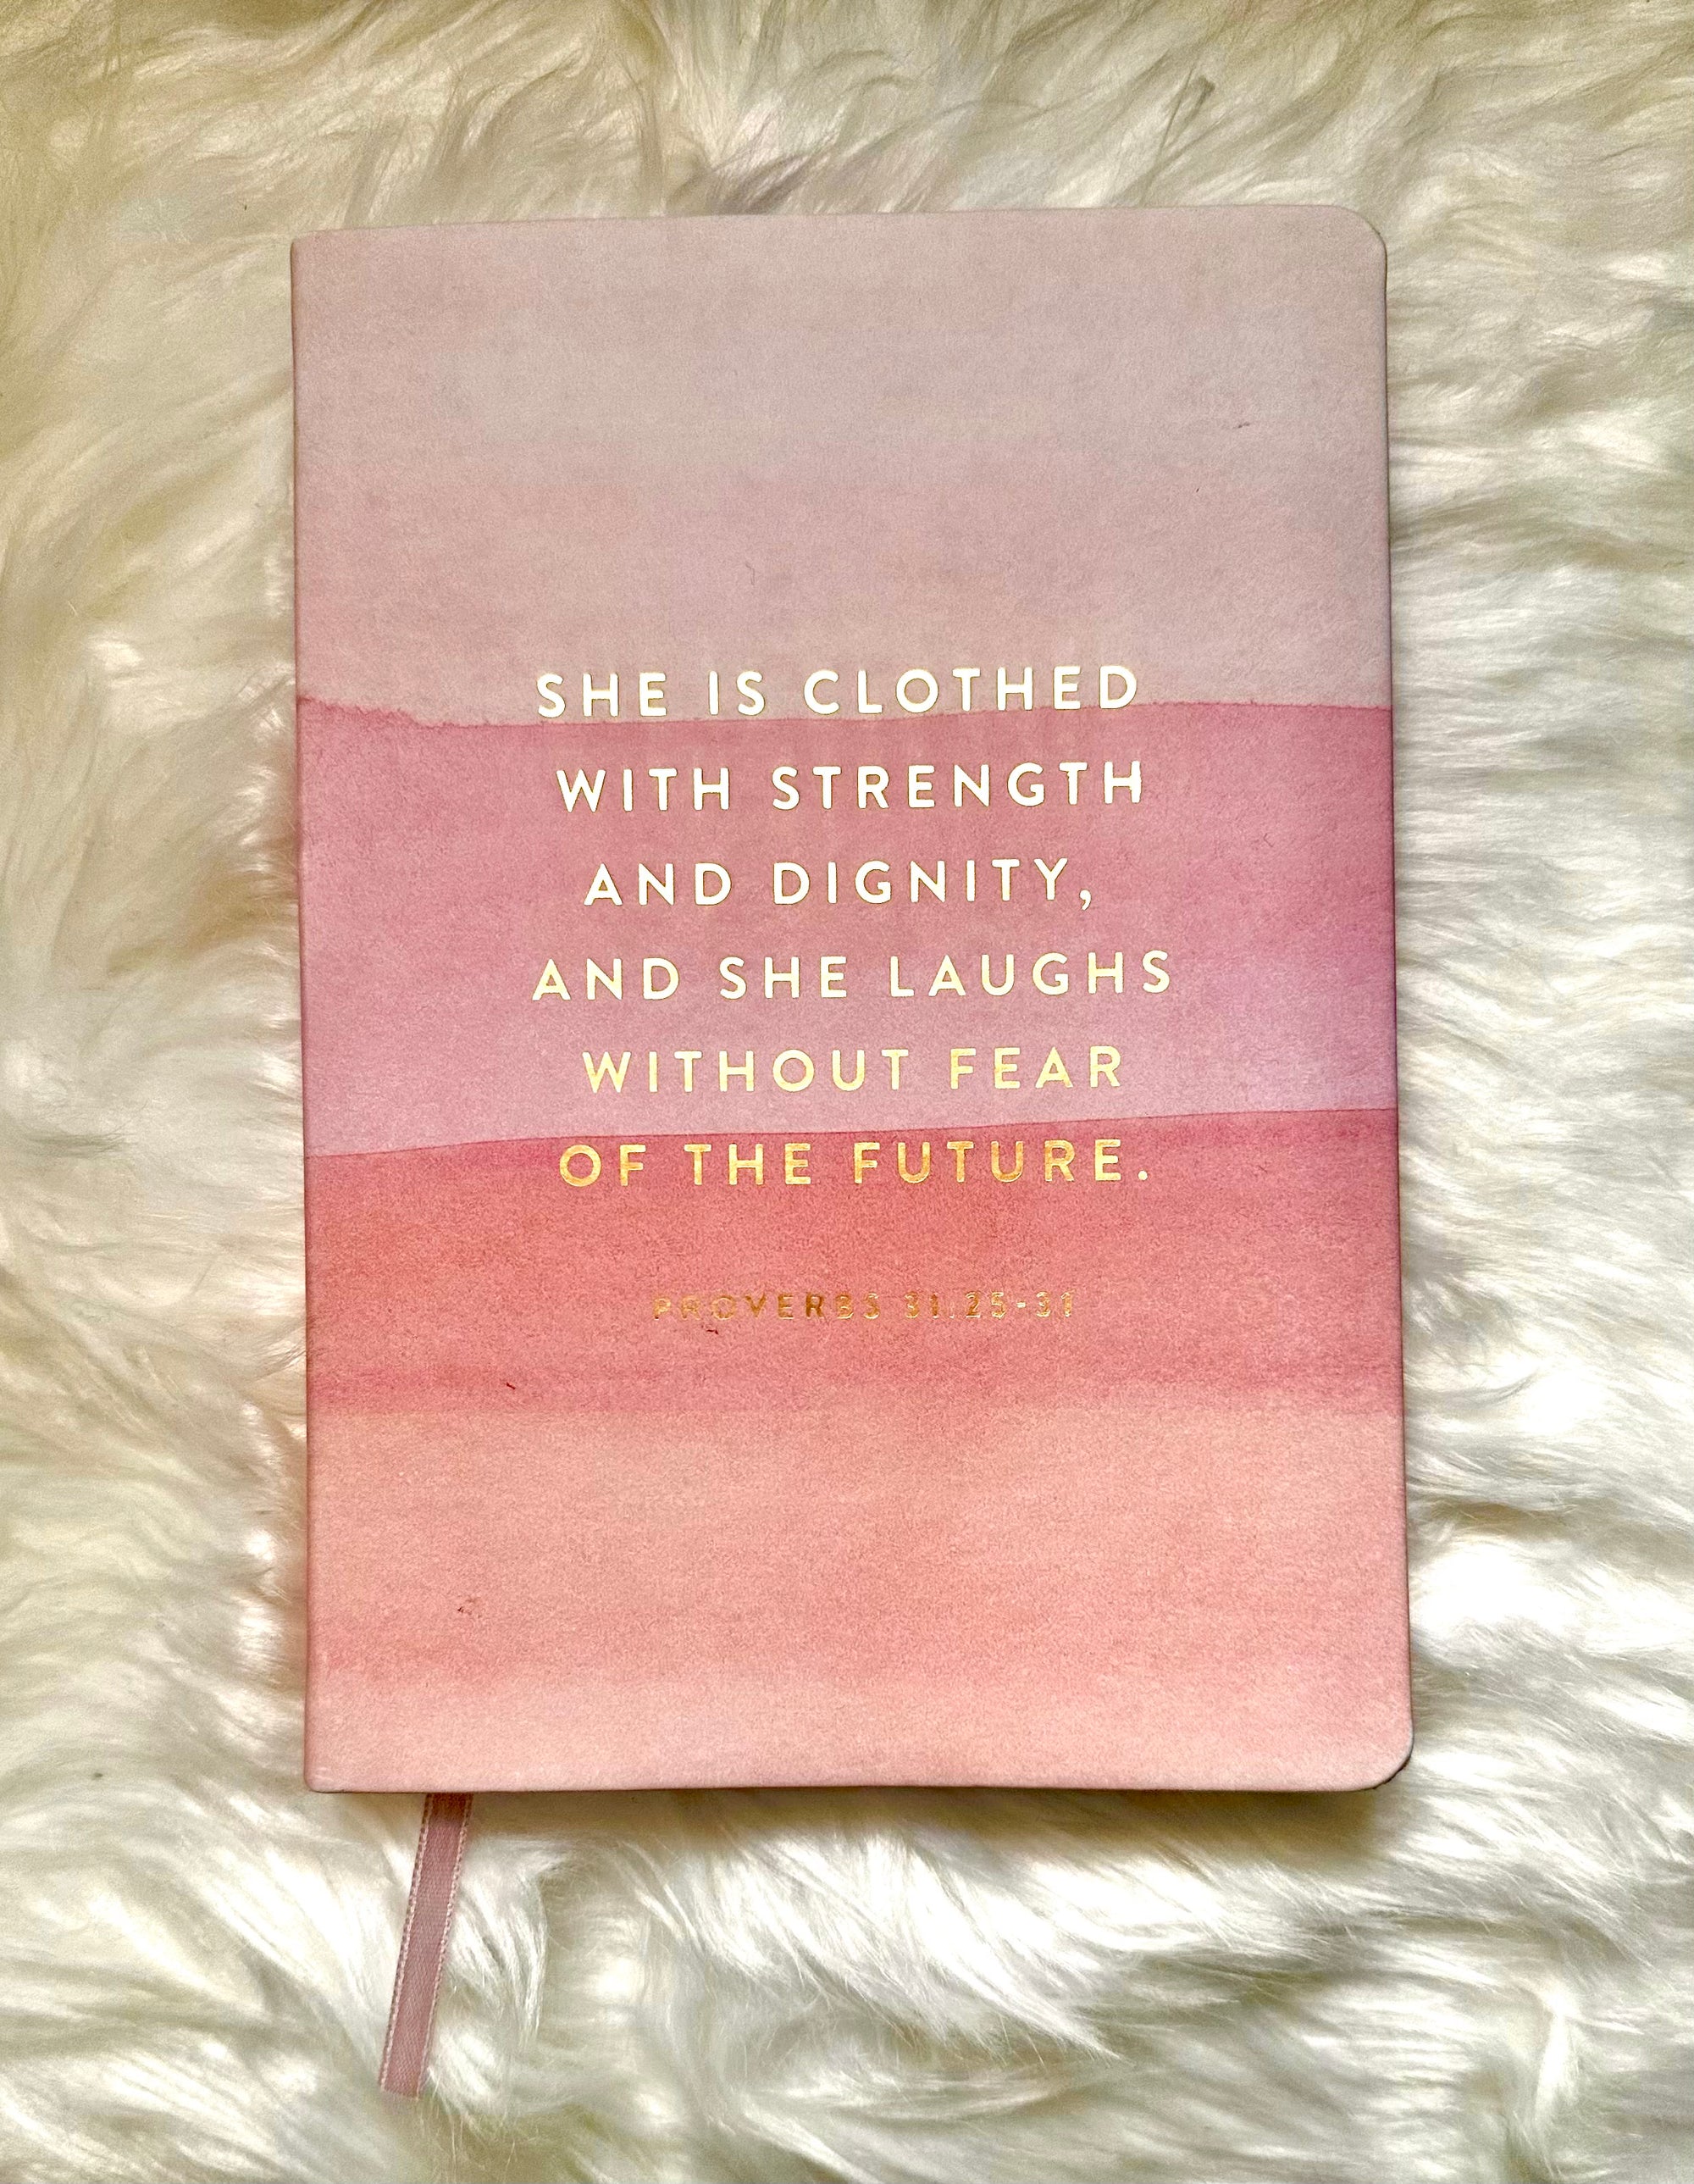 She is clothed with strength and dignity  - Journal